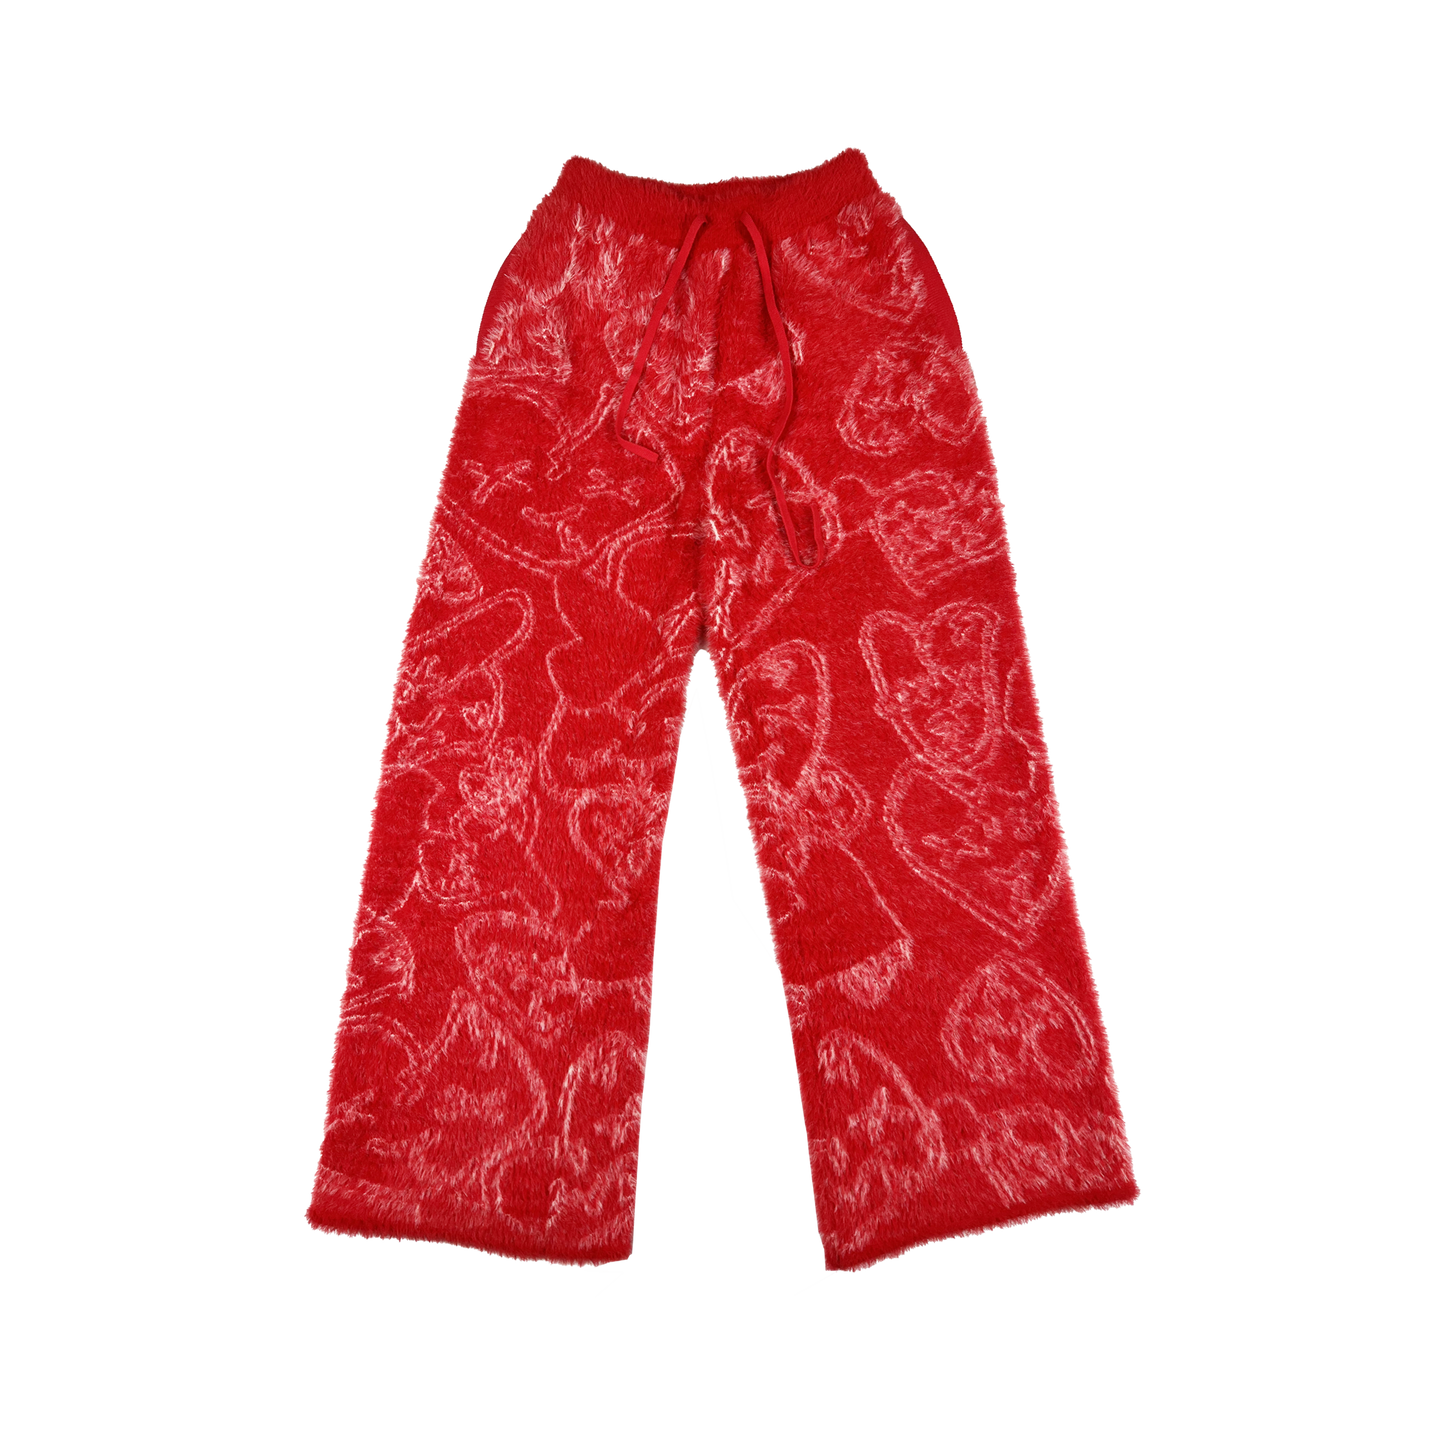 Flared Mink sweats (Red) - Royal Surge